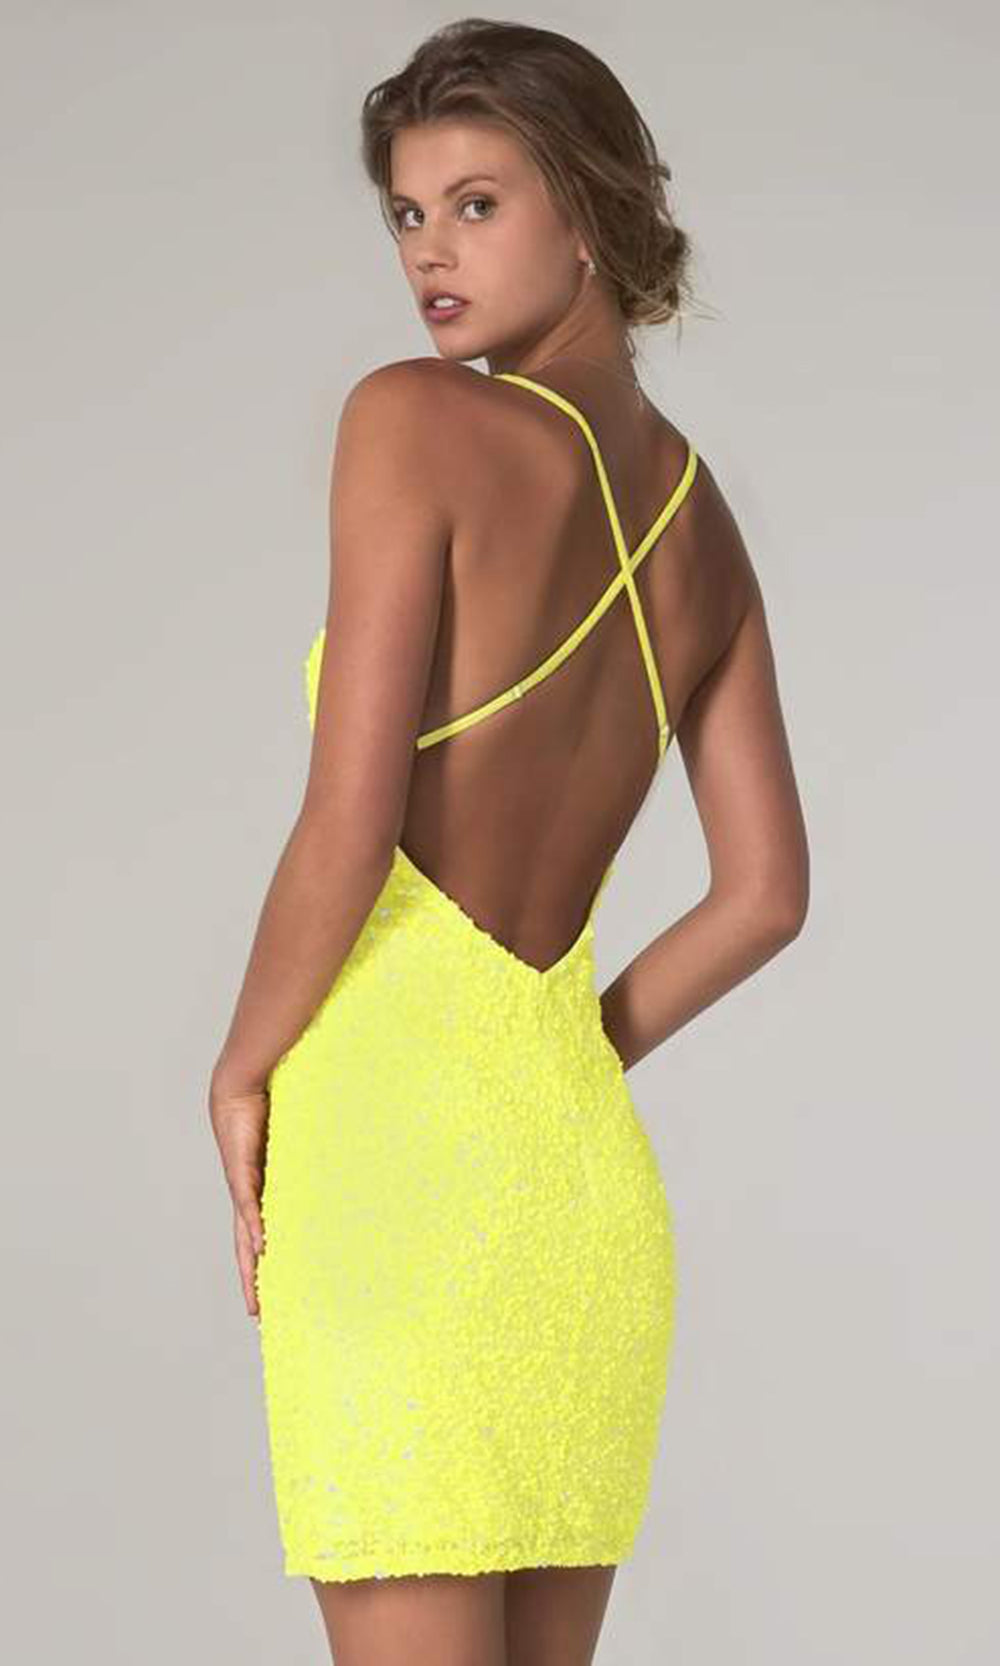 Scala - Sequin-Ornate Neon Short Dress 60060 - 1 pc Sunflower In Size 4 Available CCSALE 4 / Sunflower